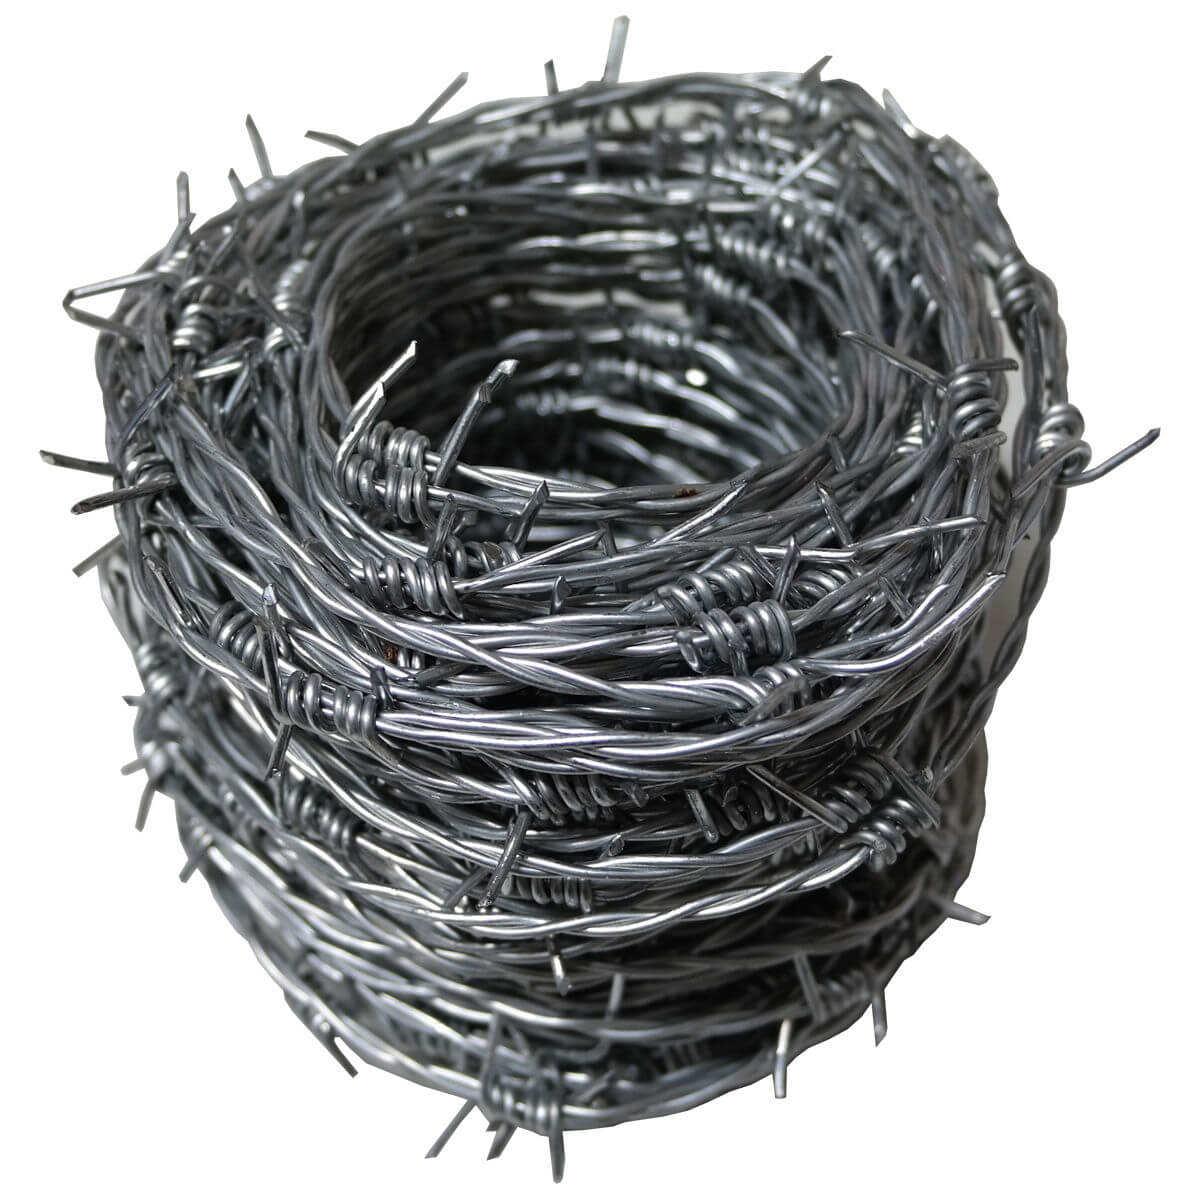 High-Quality Barbed Wire Fencing: A Wise Choice for Superior Protection